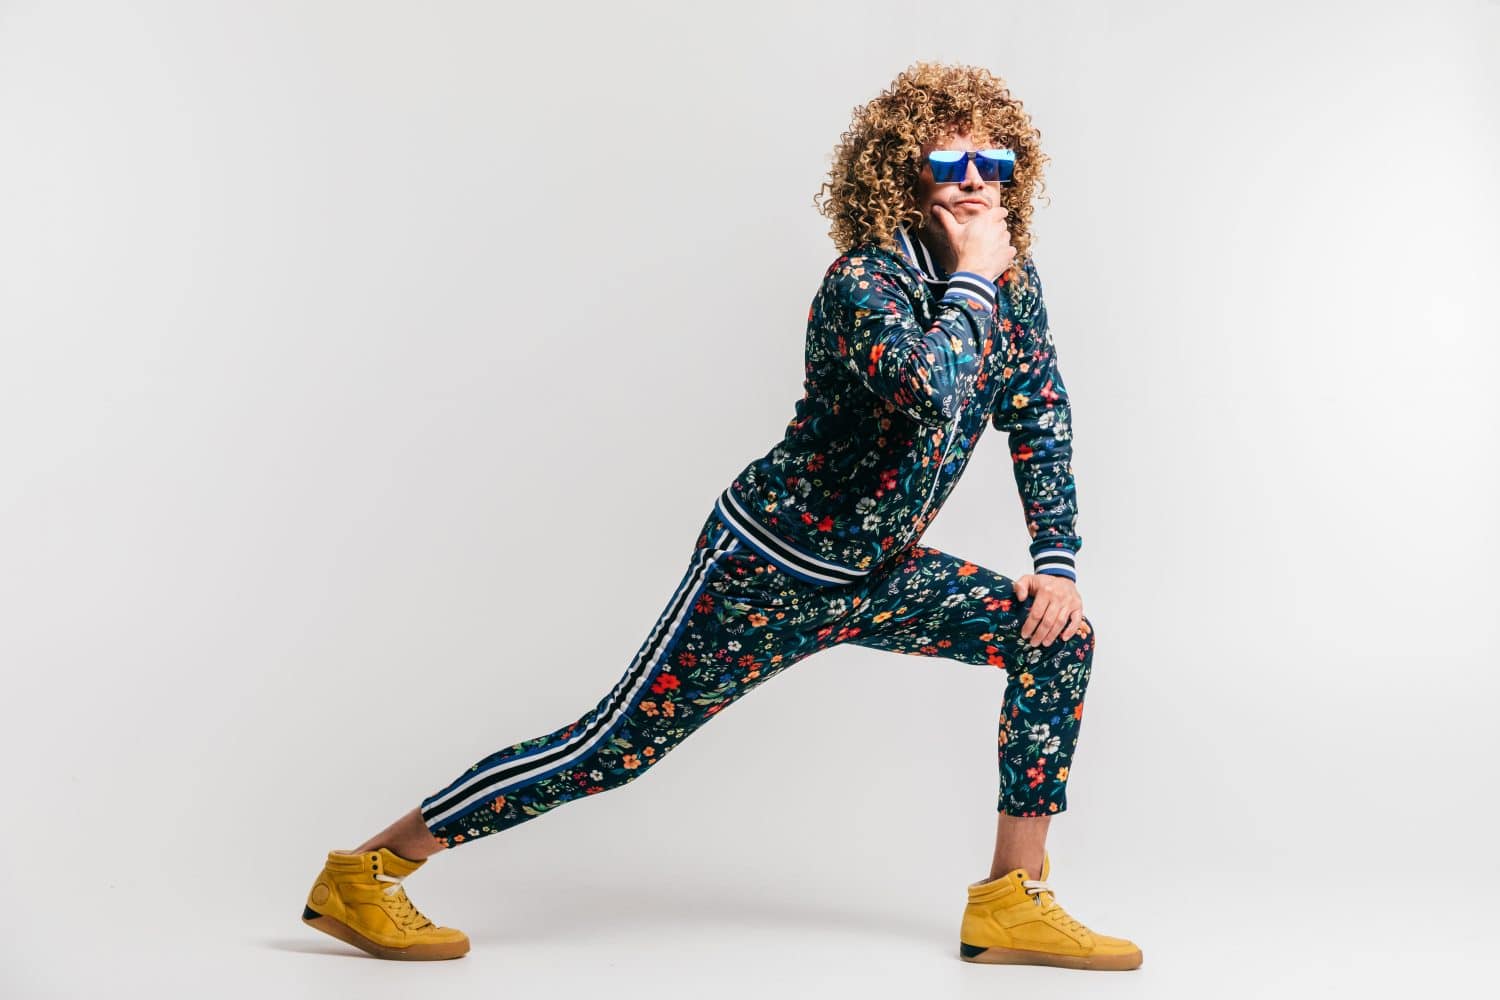 Adult positive smiling funky man with curly hair style in suglasses and vintage clothes posing on white studio background. Funny portrait of stylish male person. 80s fashion. Unusual eccentric guy